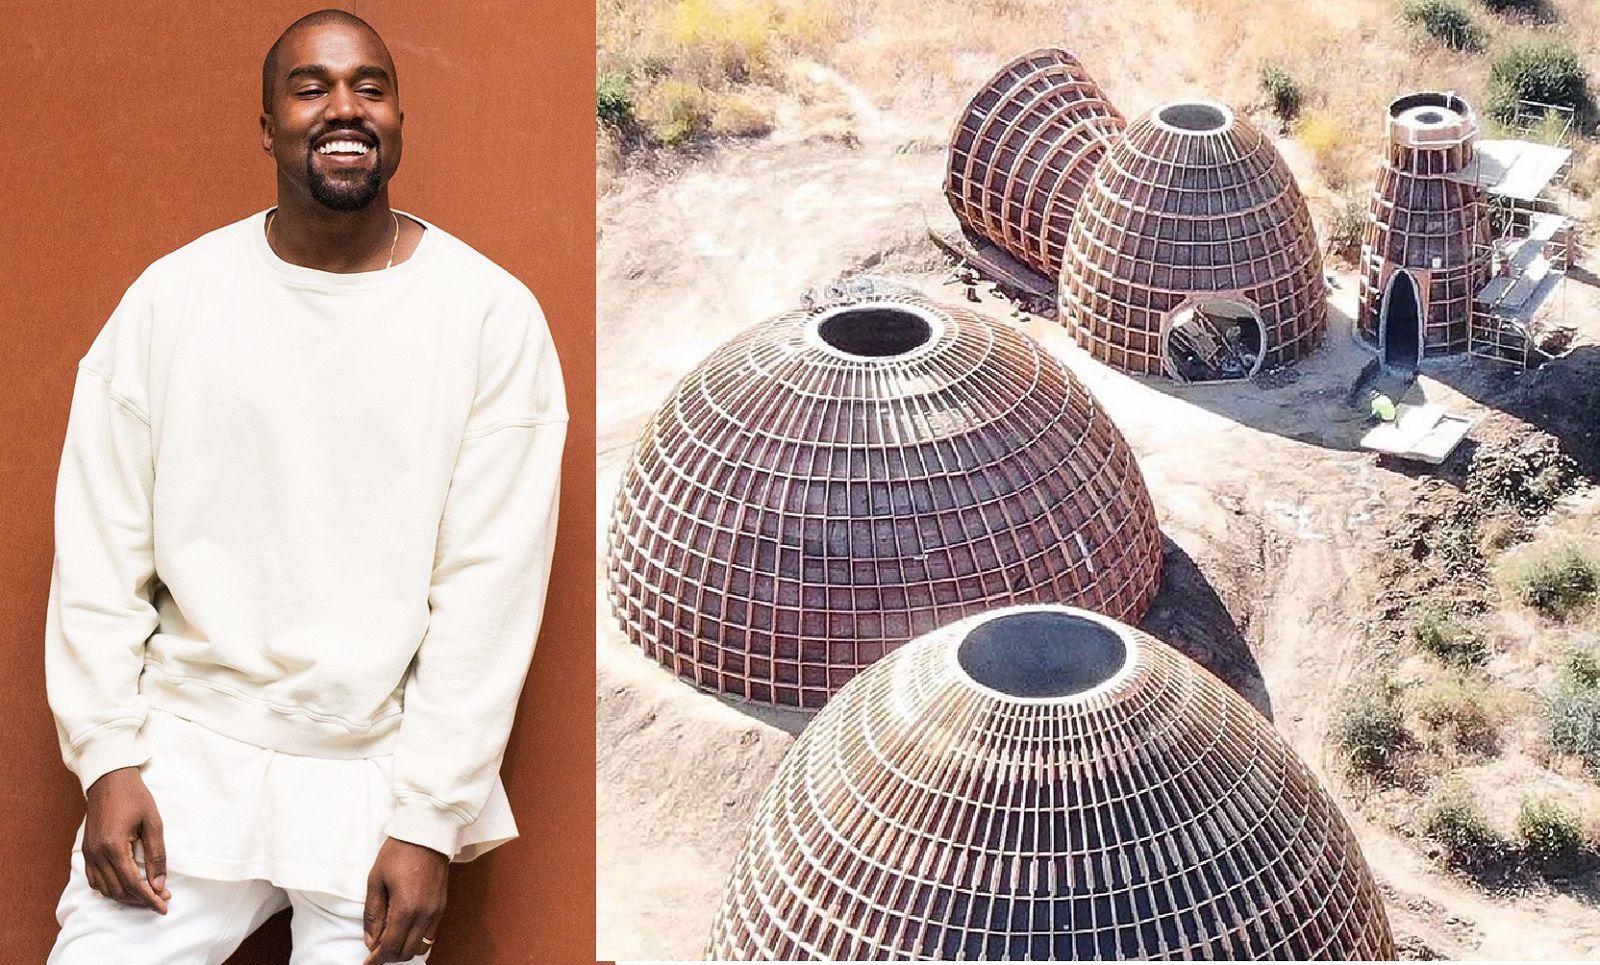 Kanye West is building public housing in California The new project by Yeezy Home seems inspired by the architecture of Star Wars